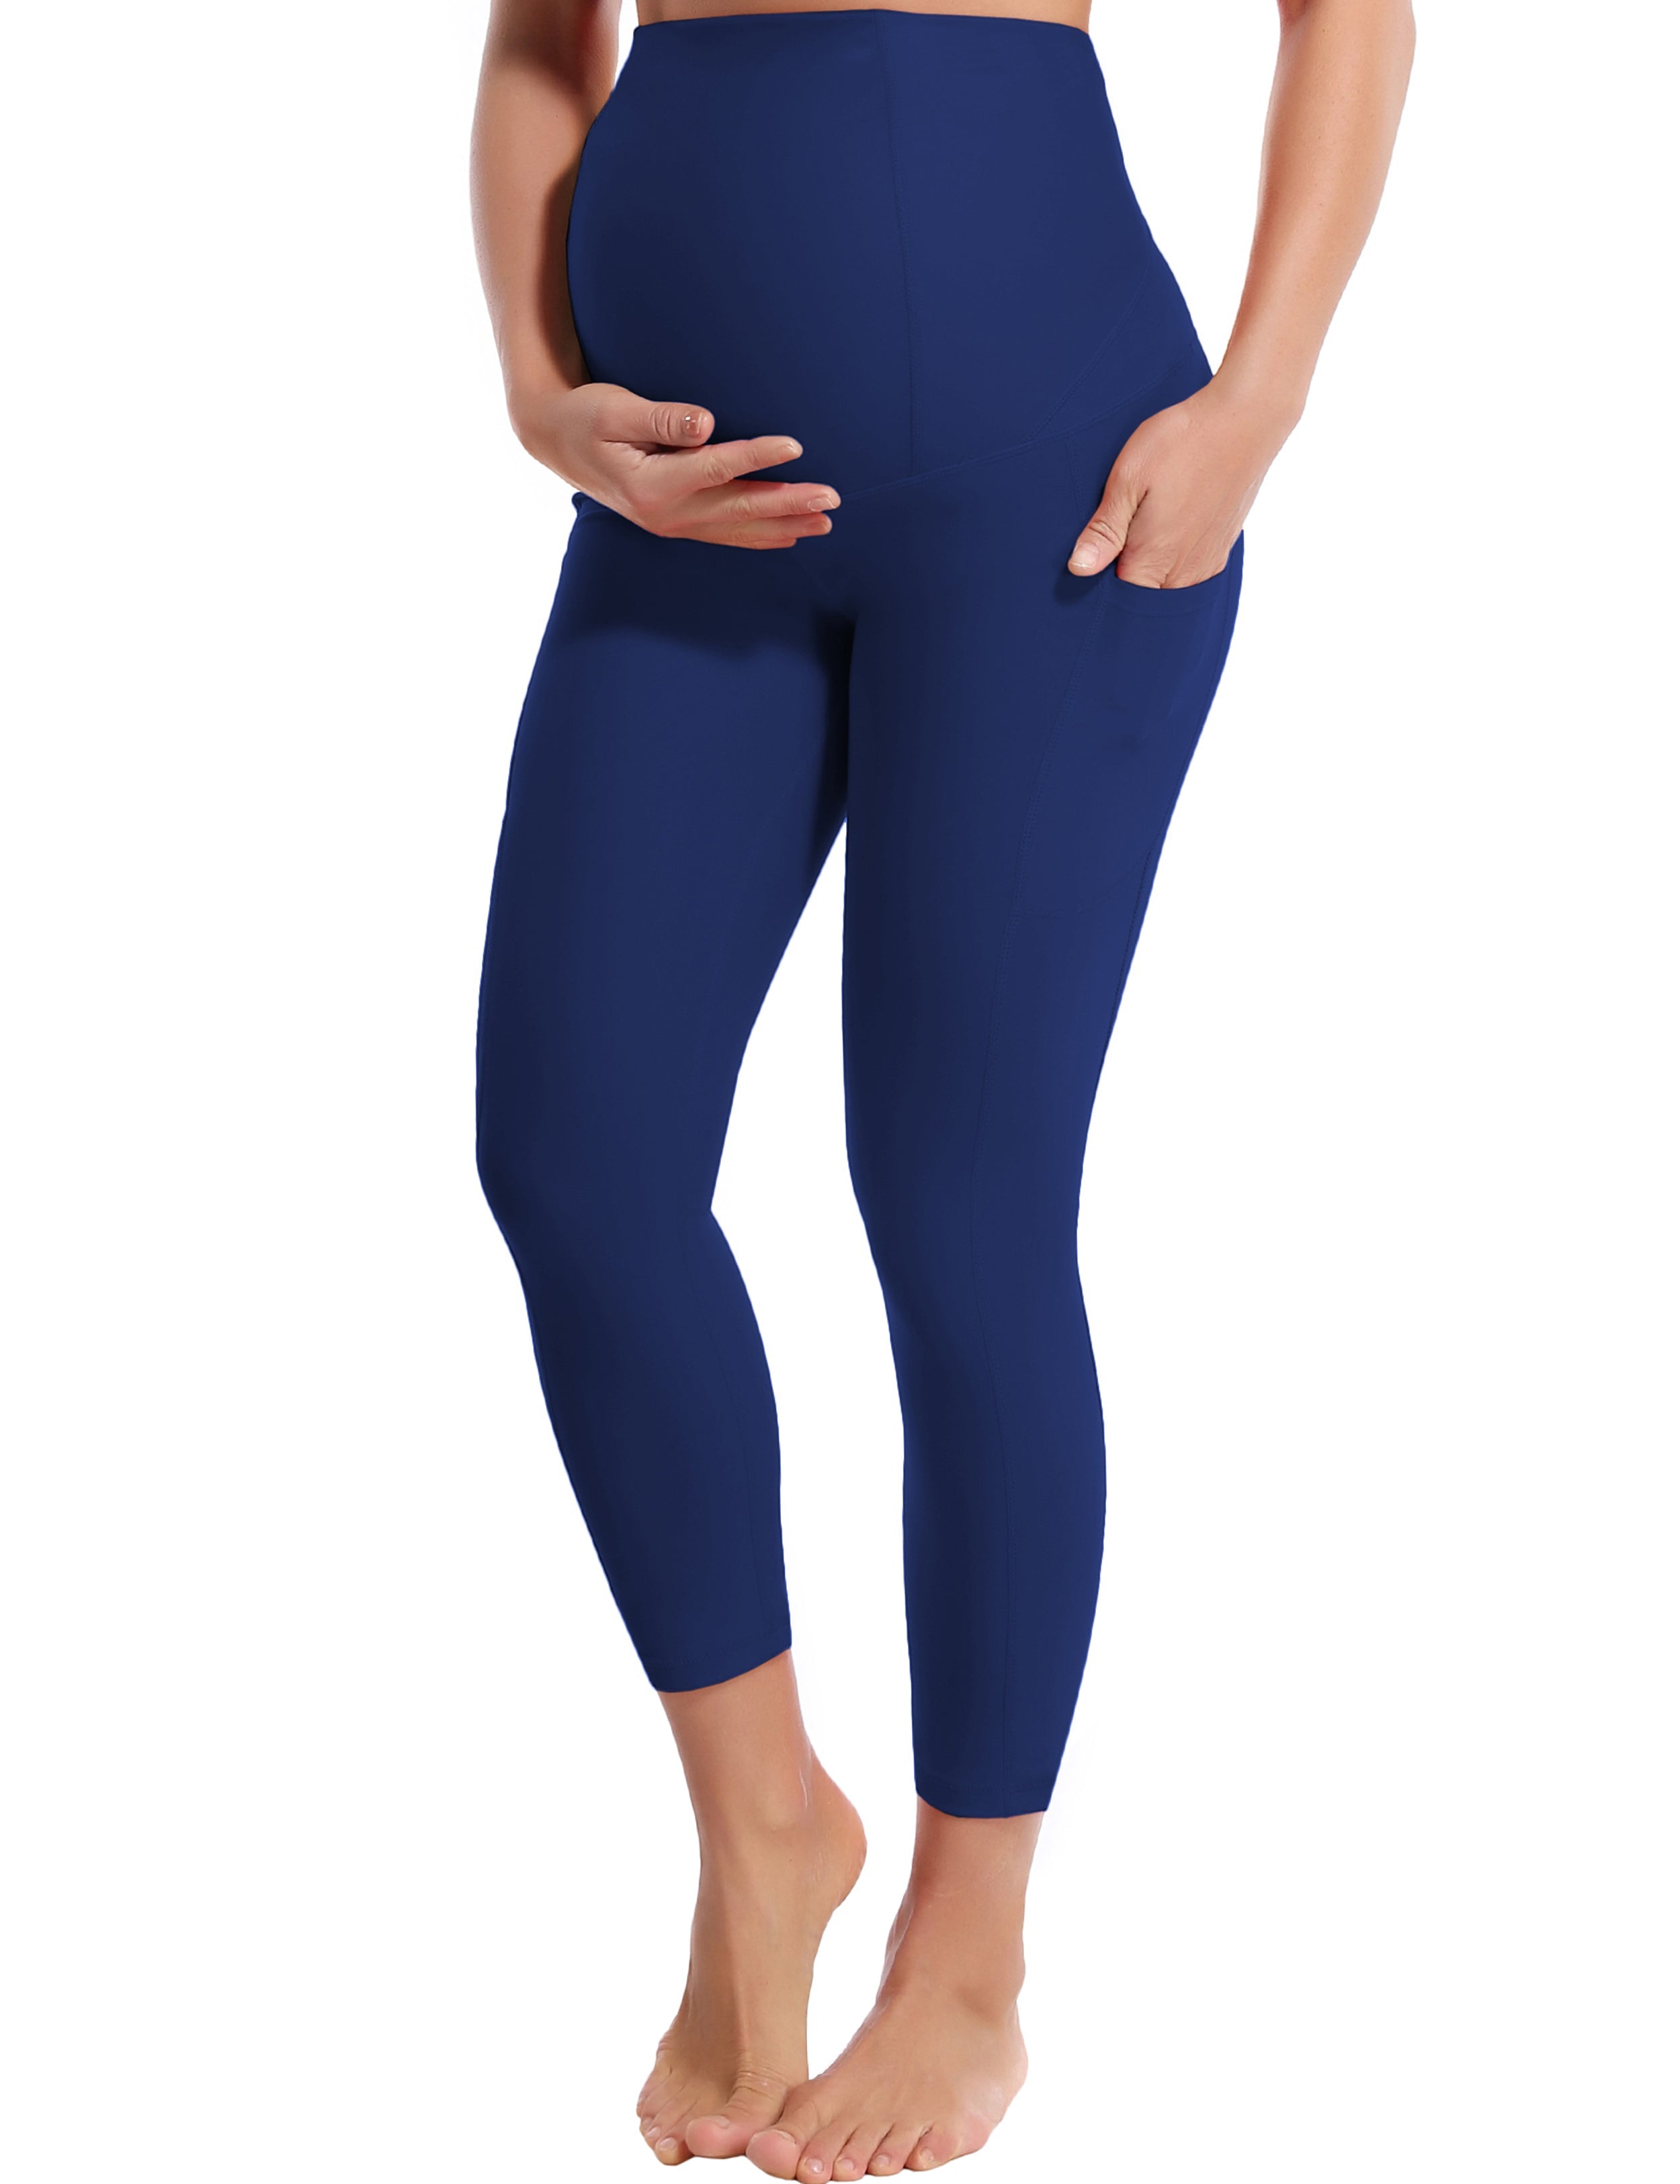 22" Side Pockets Maternity Jogging Pants navy 87%Nylon/13%Spandex Softest-ever fabric High elasticity 4-way stretch Fabric doesn't attract lint easily No see-through Moisture-wicking Machine wash